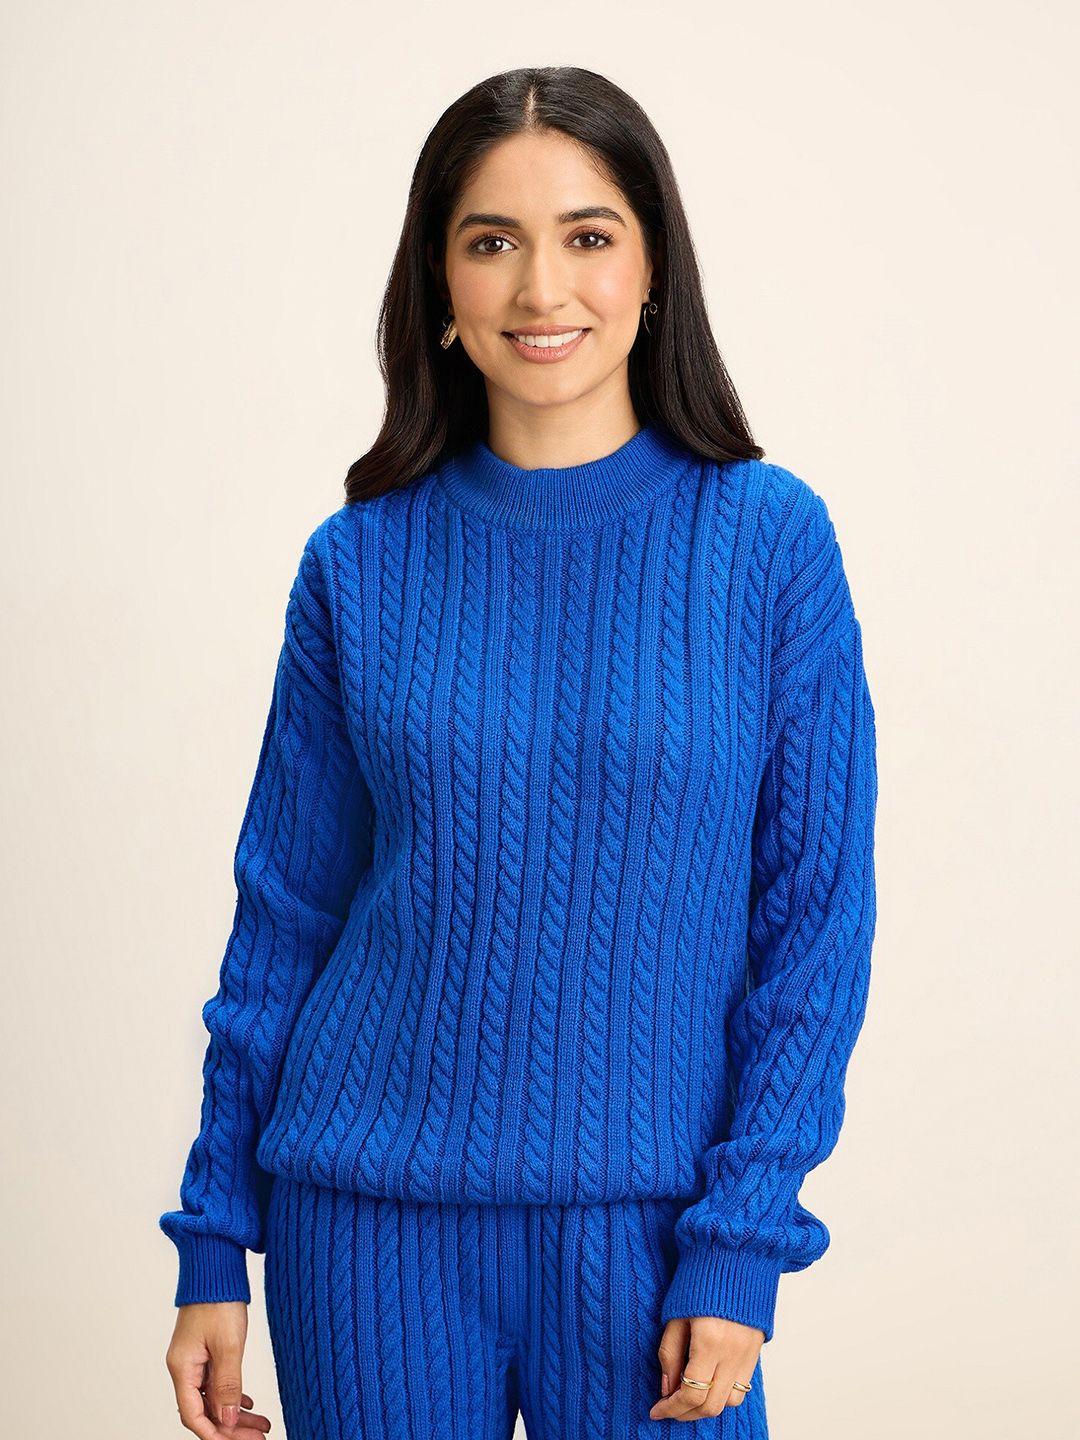 20dresses blue mock neck cable knit acrylic pullover